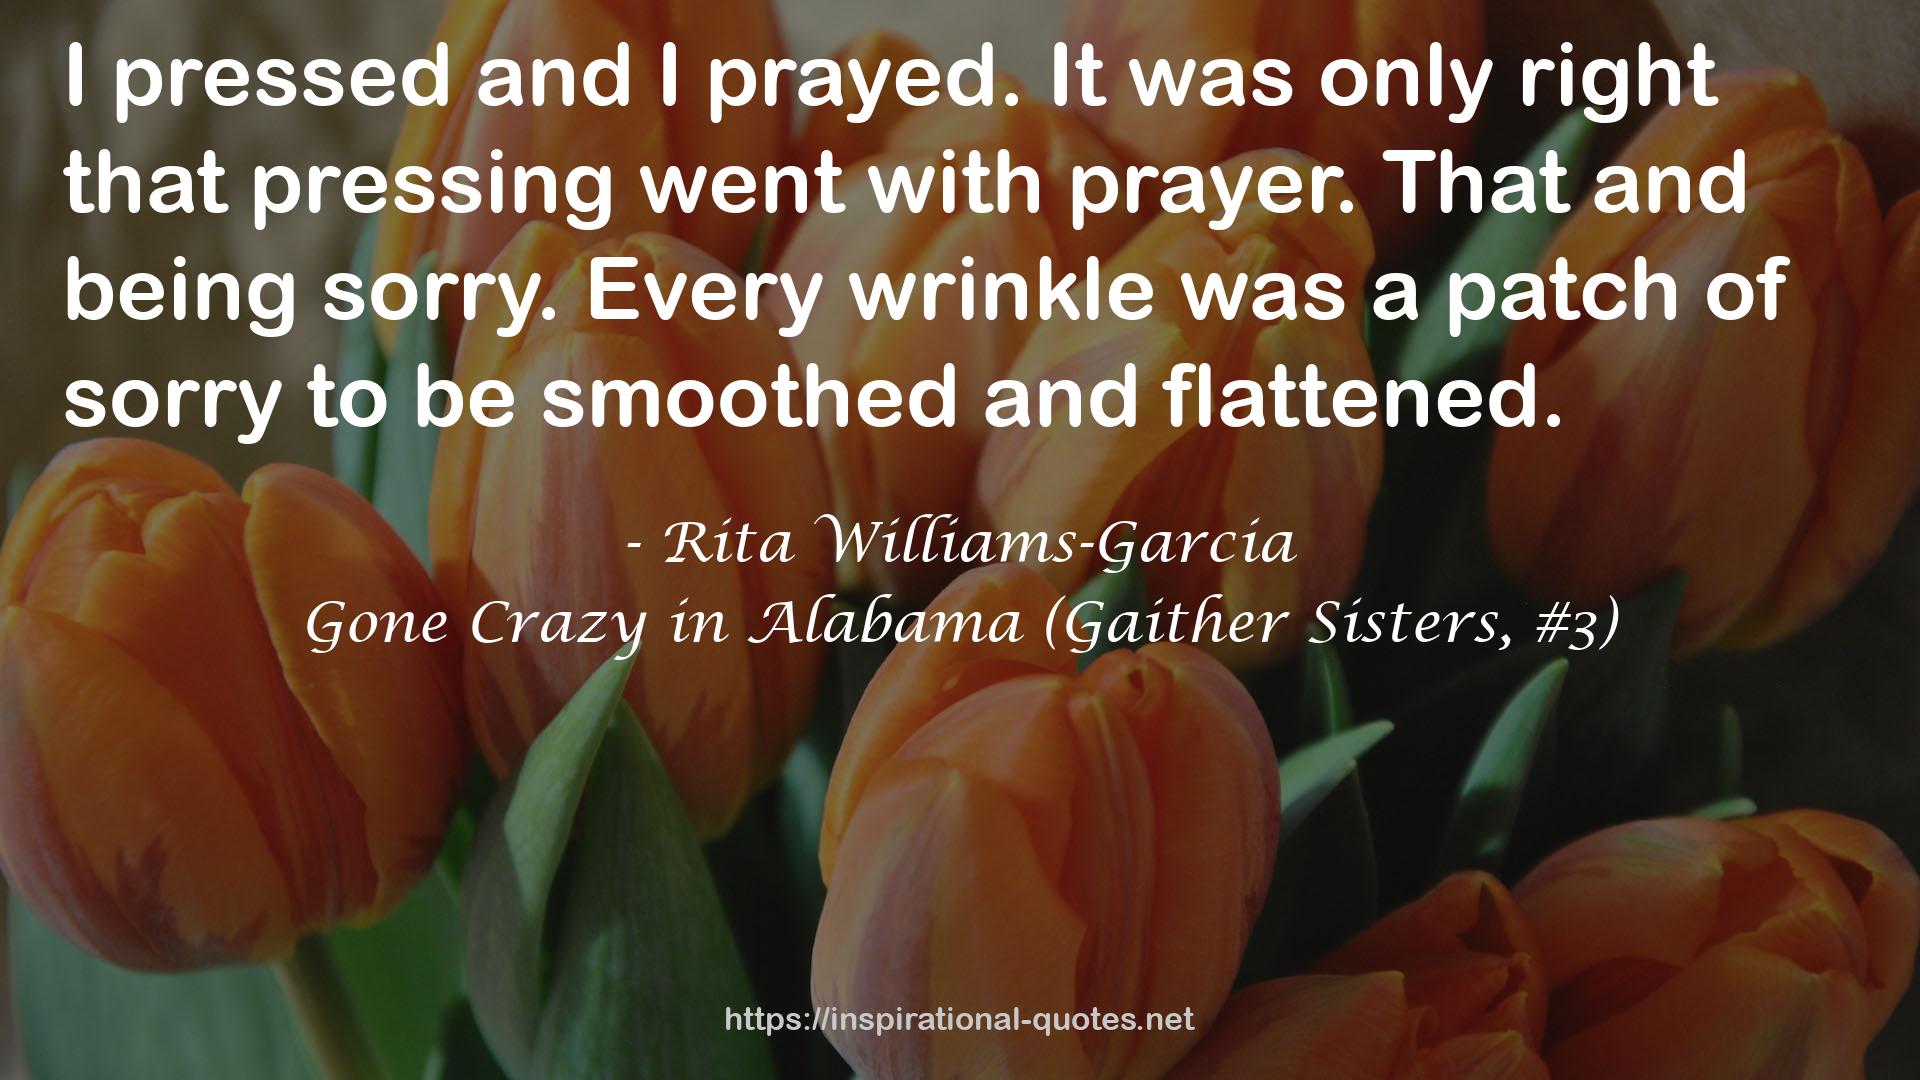 Gone Crazy in Alabama (Gaither Sisters, #3) QUOTES